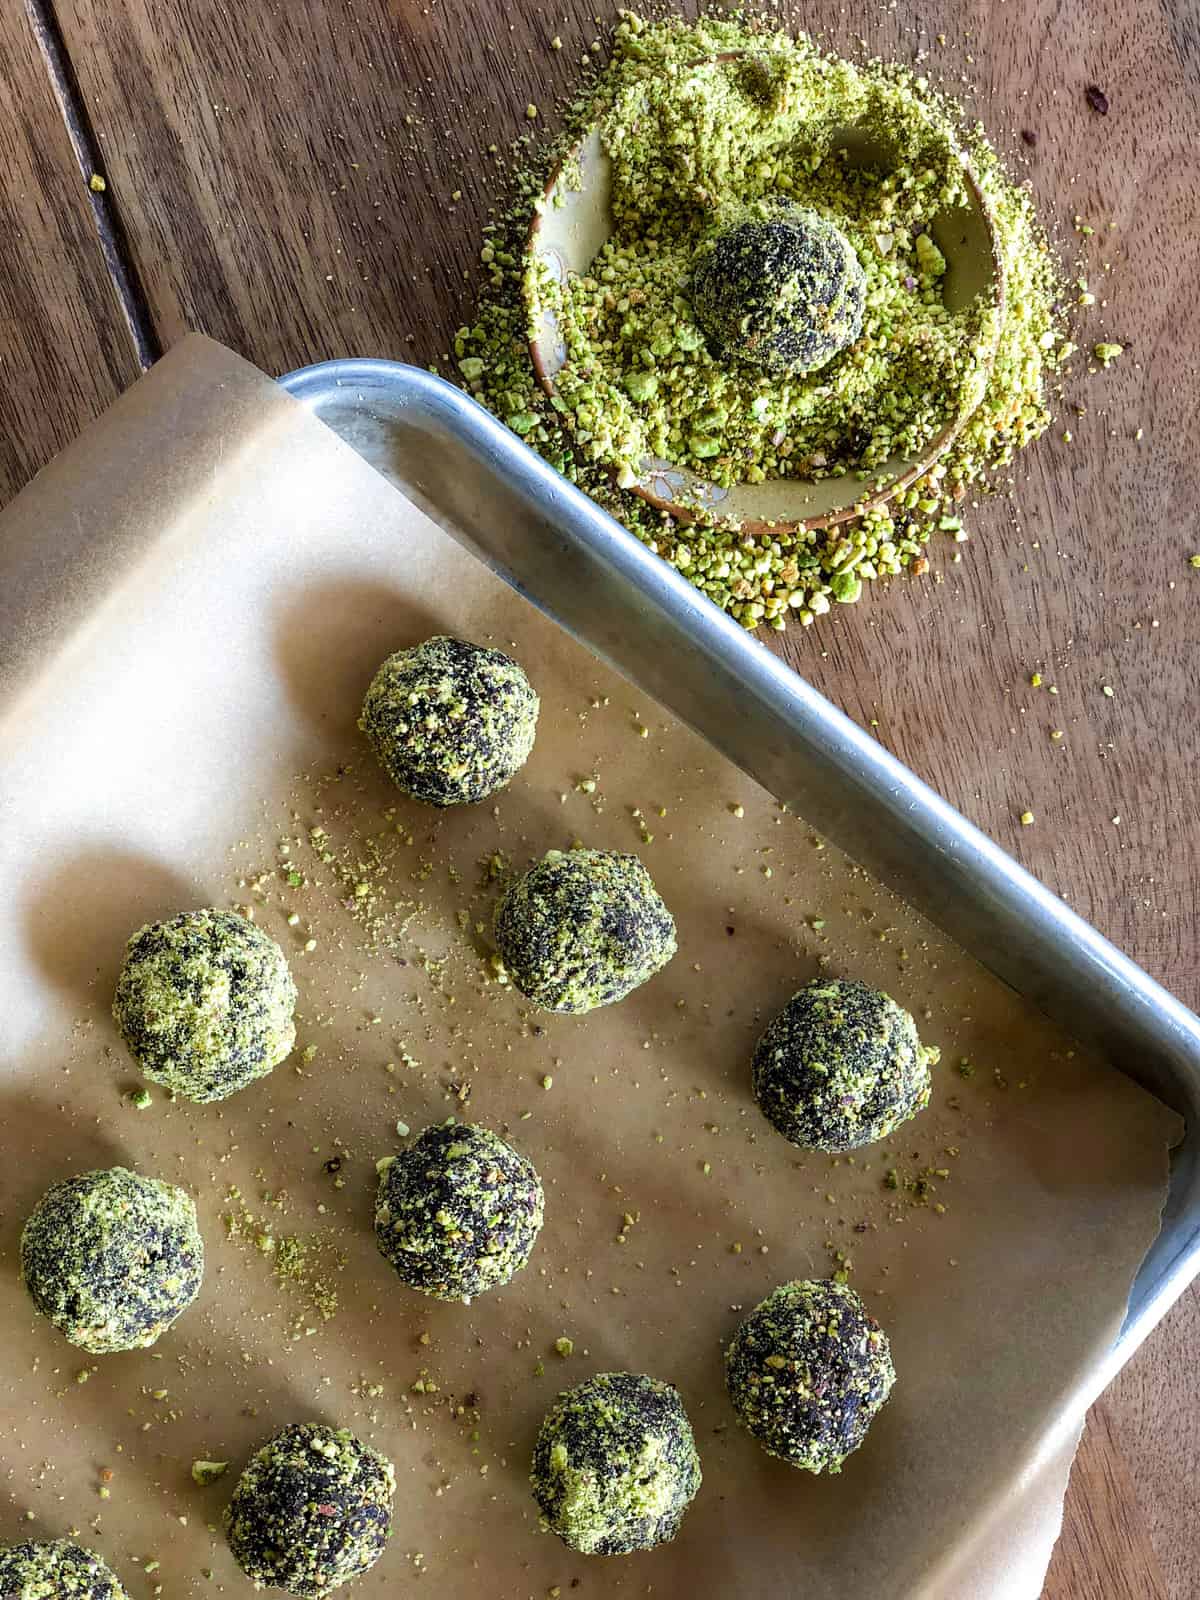 Pistachio Prune Truffles. A delicious, heart healthy alternative to an otherwise high fat treat.